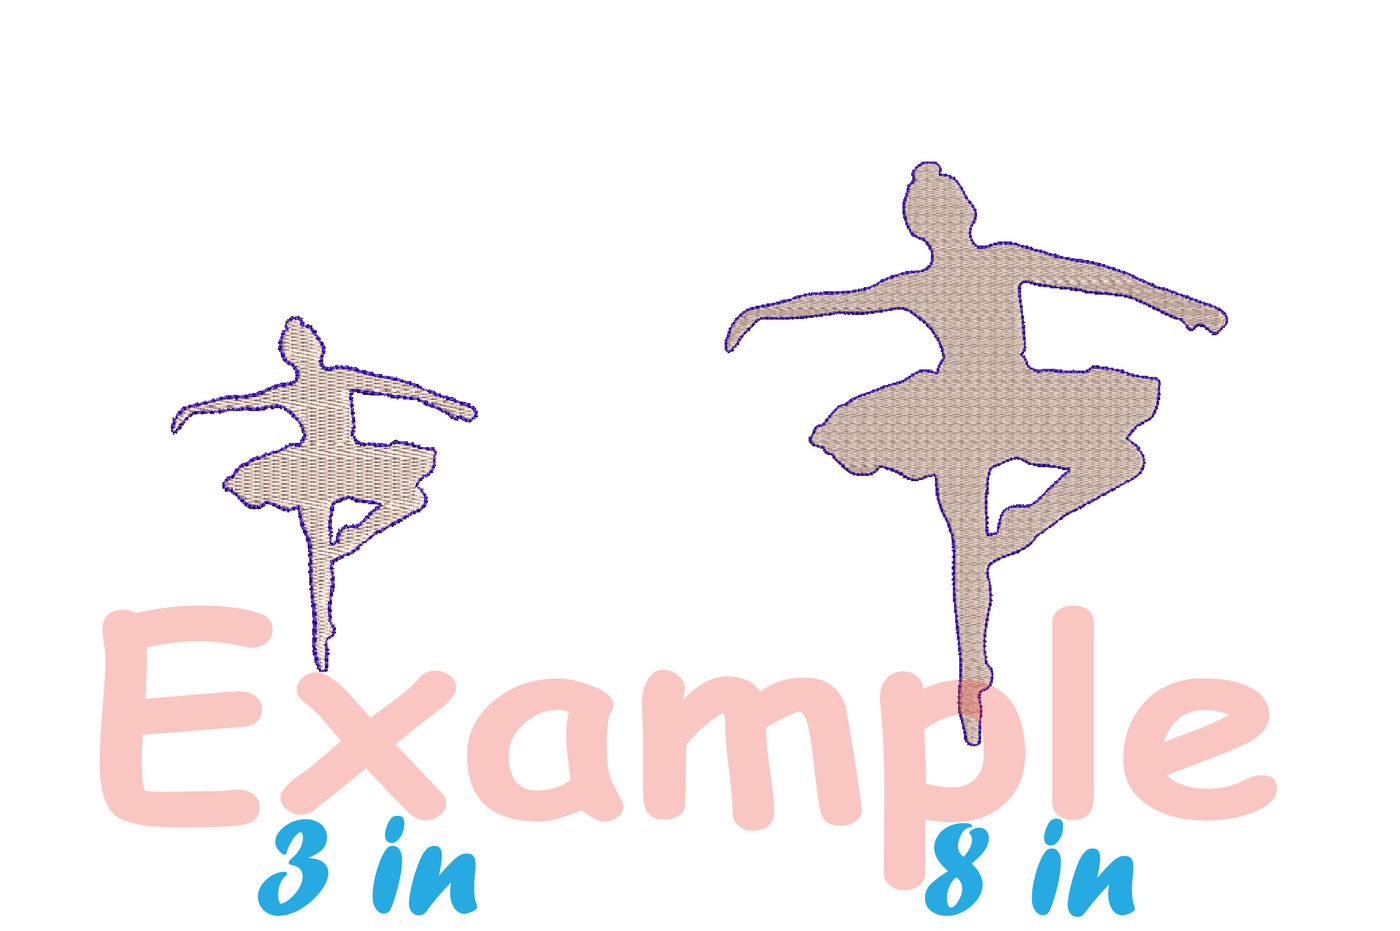 Ballet Ballerina Designs for Embroidery Machine Instant Download Commercial Use digital file 4x4 5x7 hoop icon symbol sign ribbon Dancer 43b